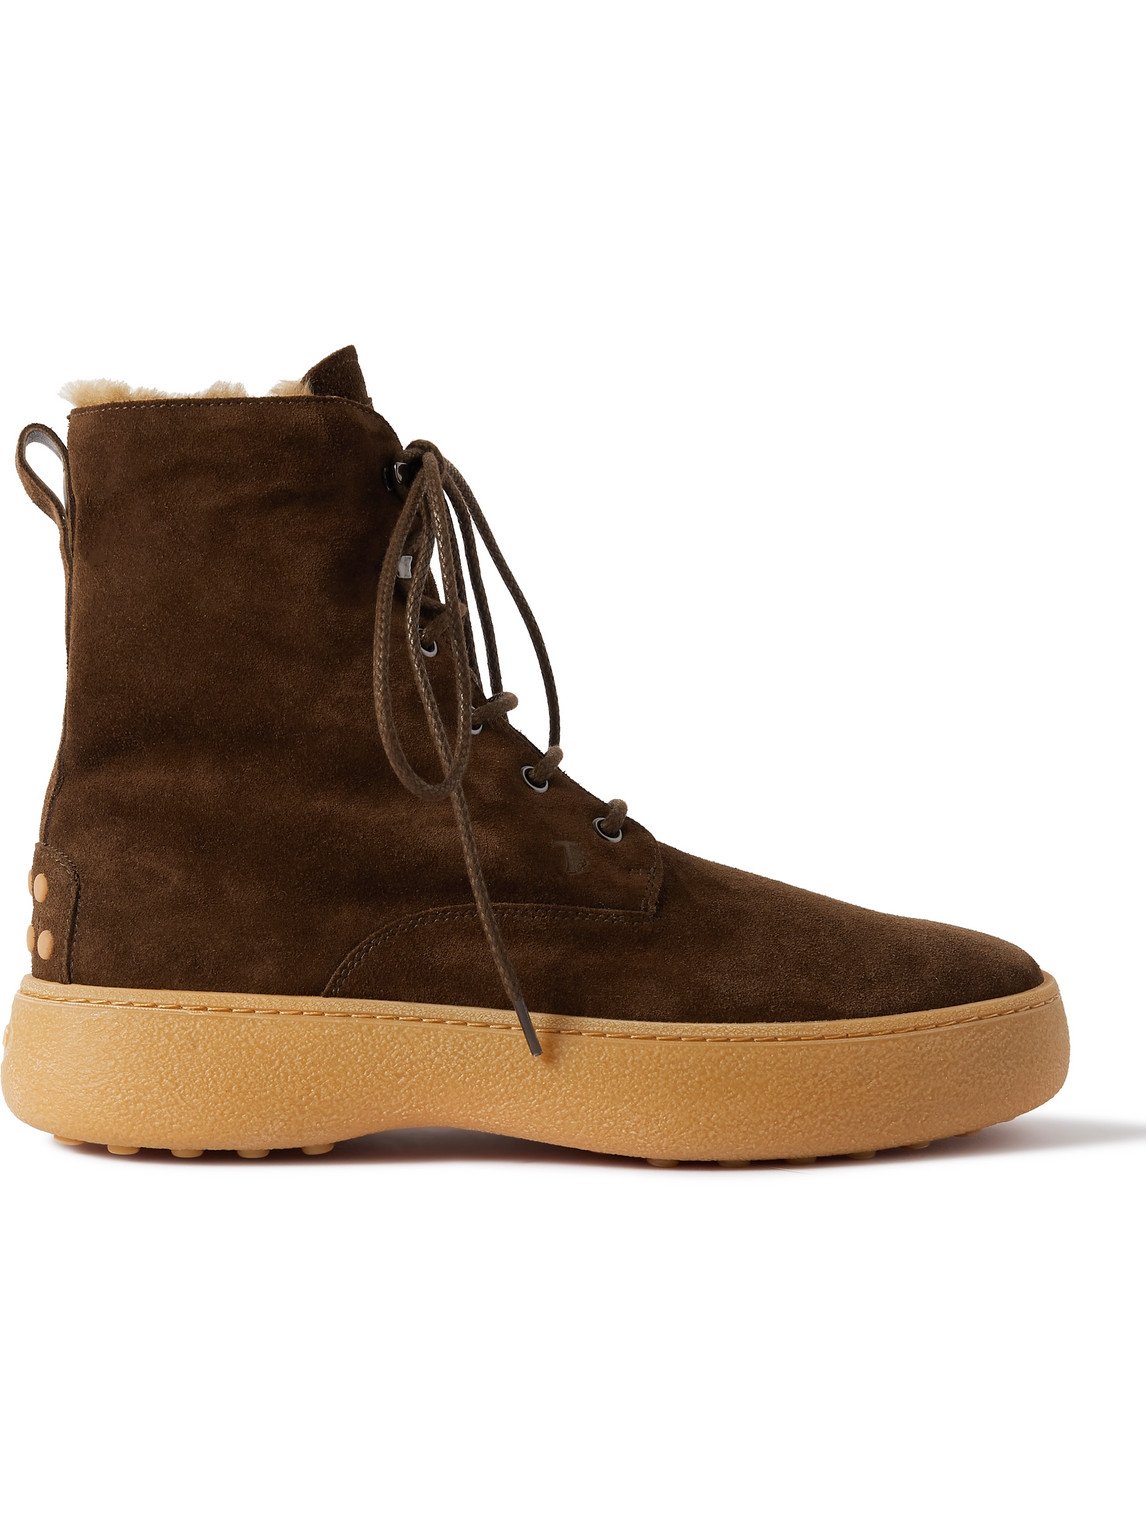 Tod's Shearling-Lined Suede Boots